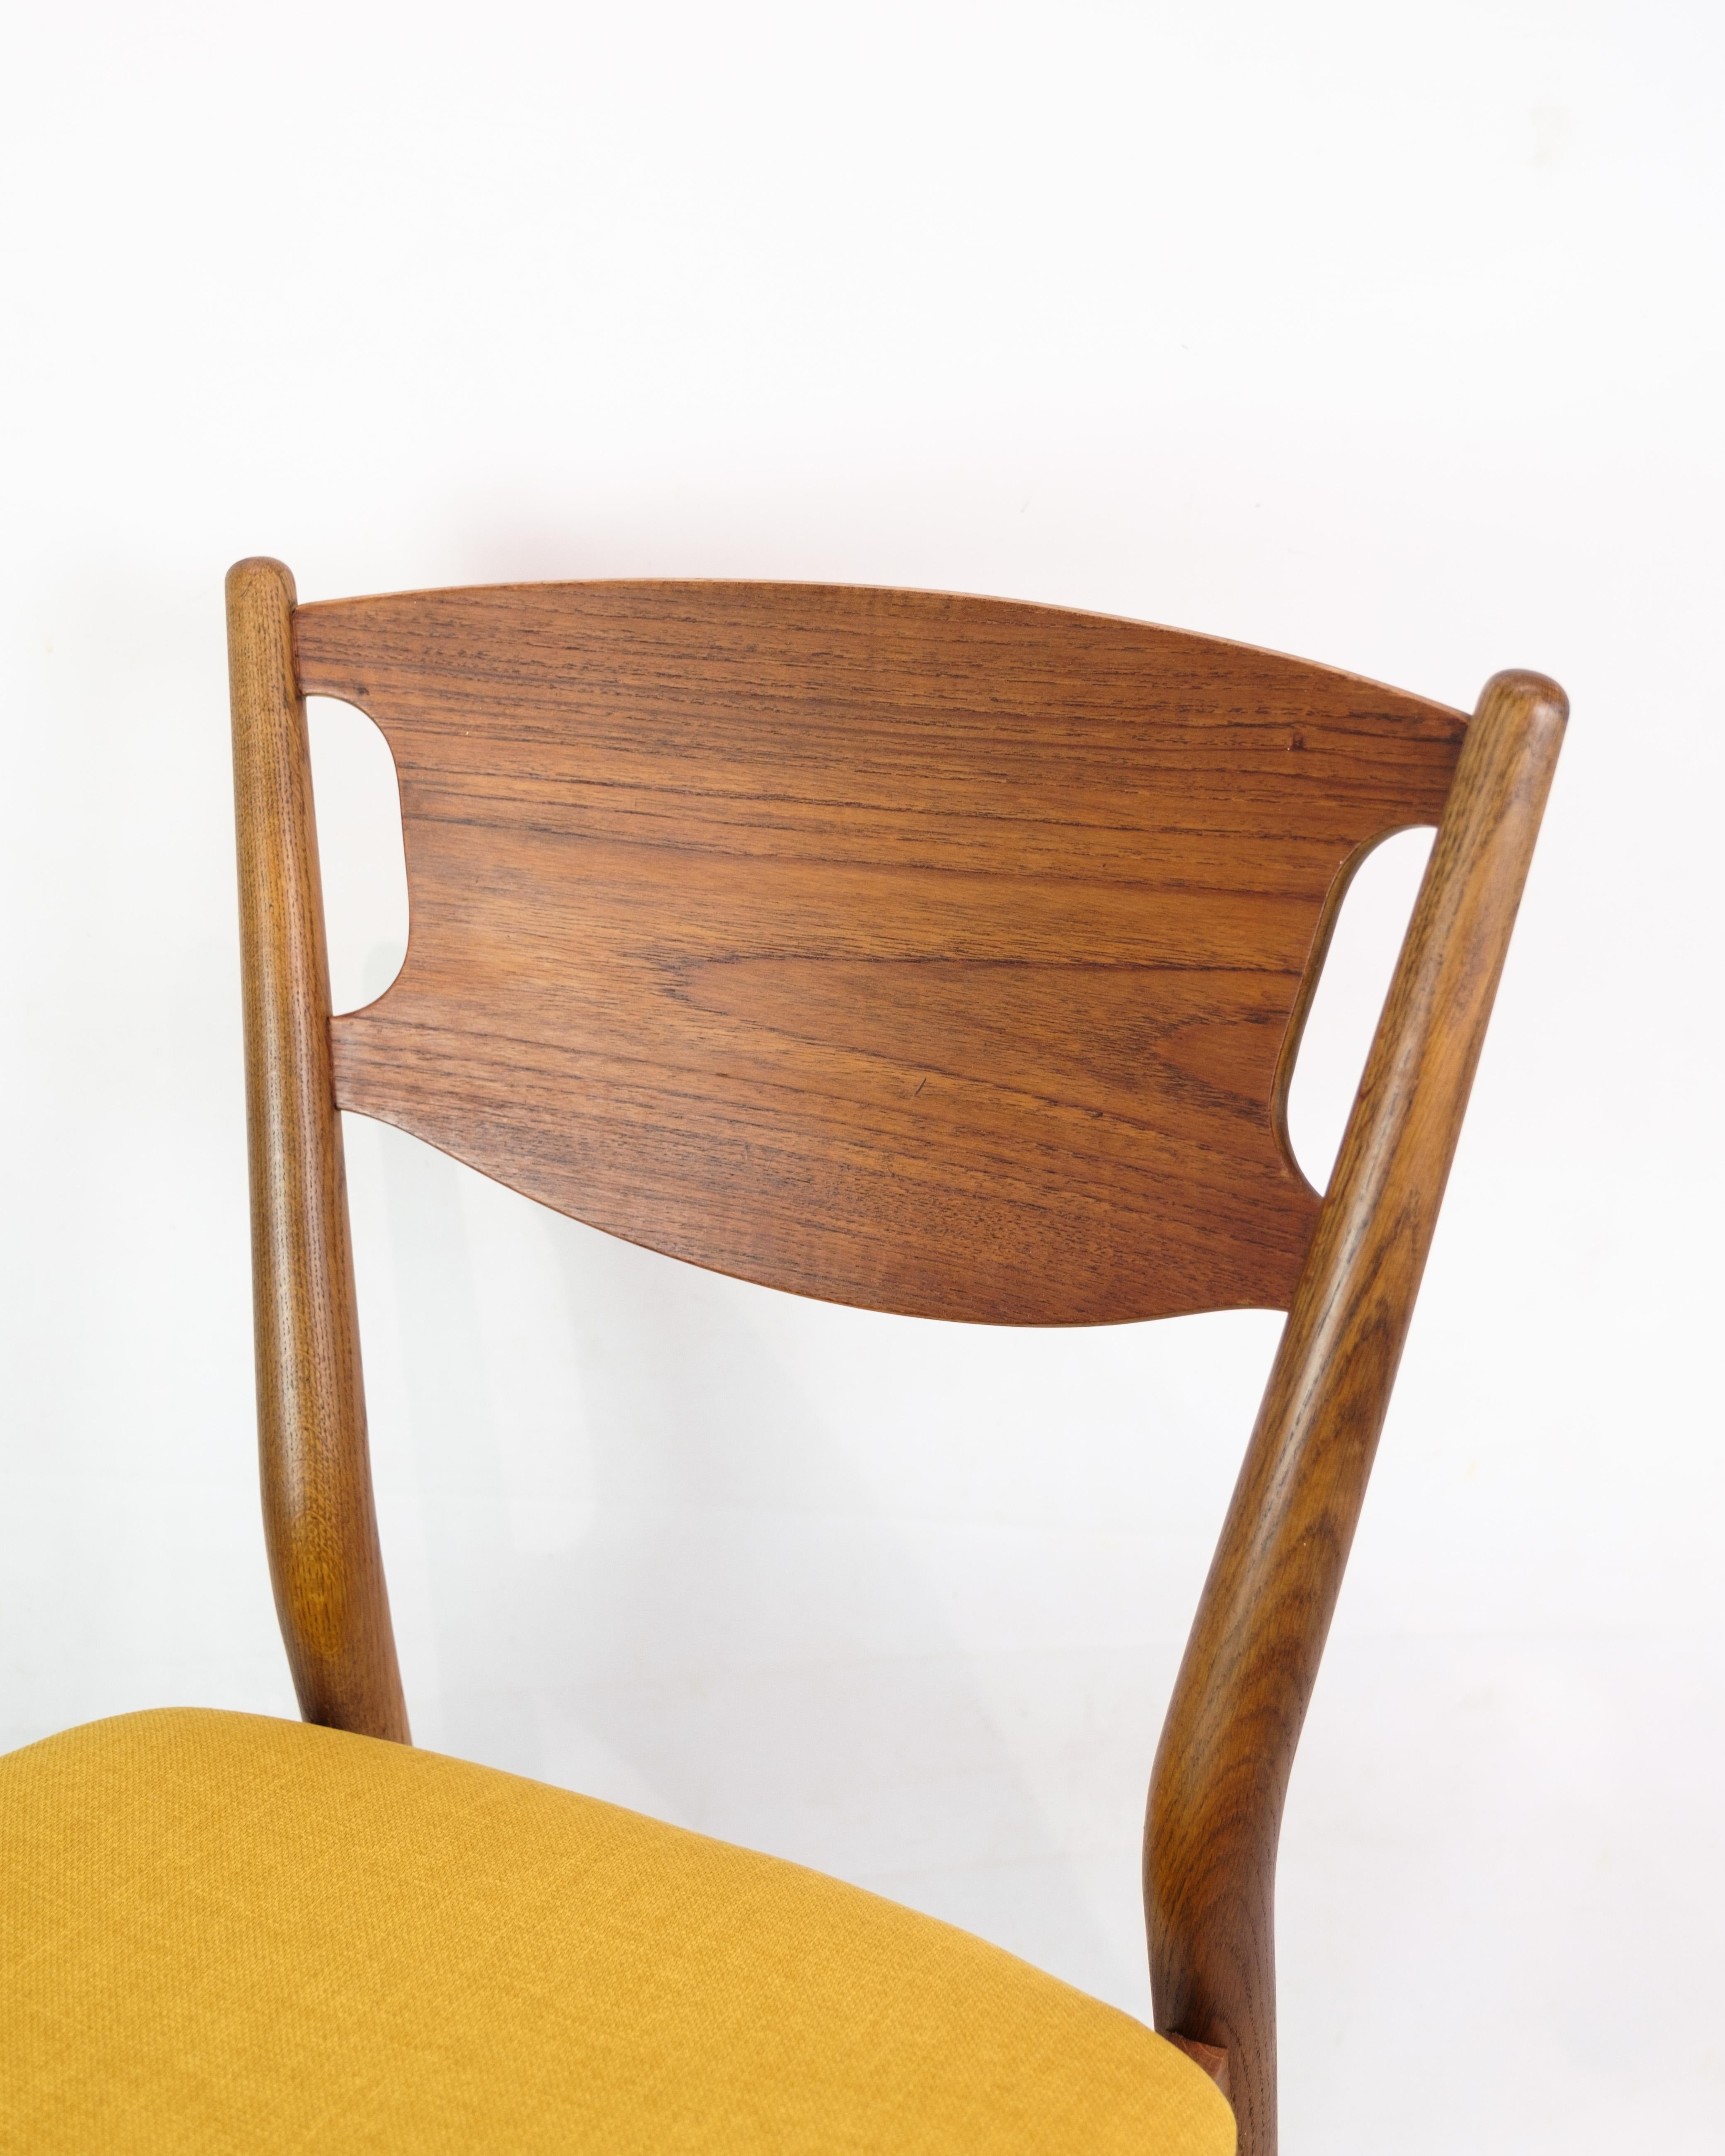 4 Dining Room Chairs, Danish Design, Teak Wood, Fabric Cover, 1960 For Sale 6